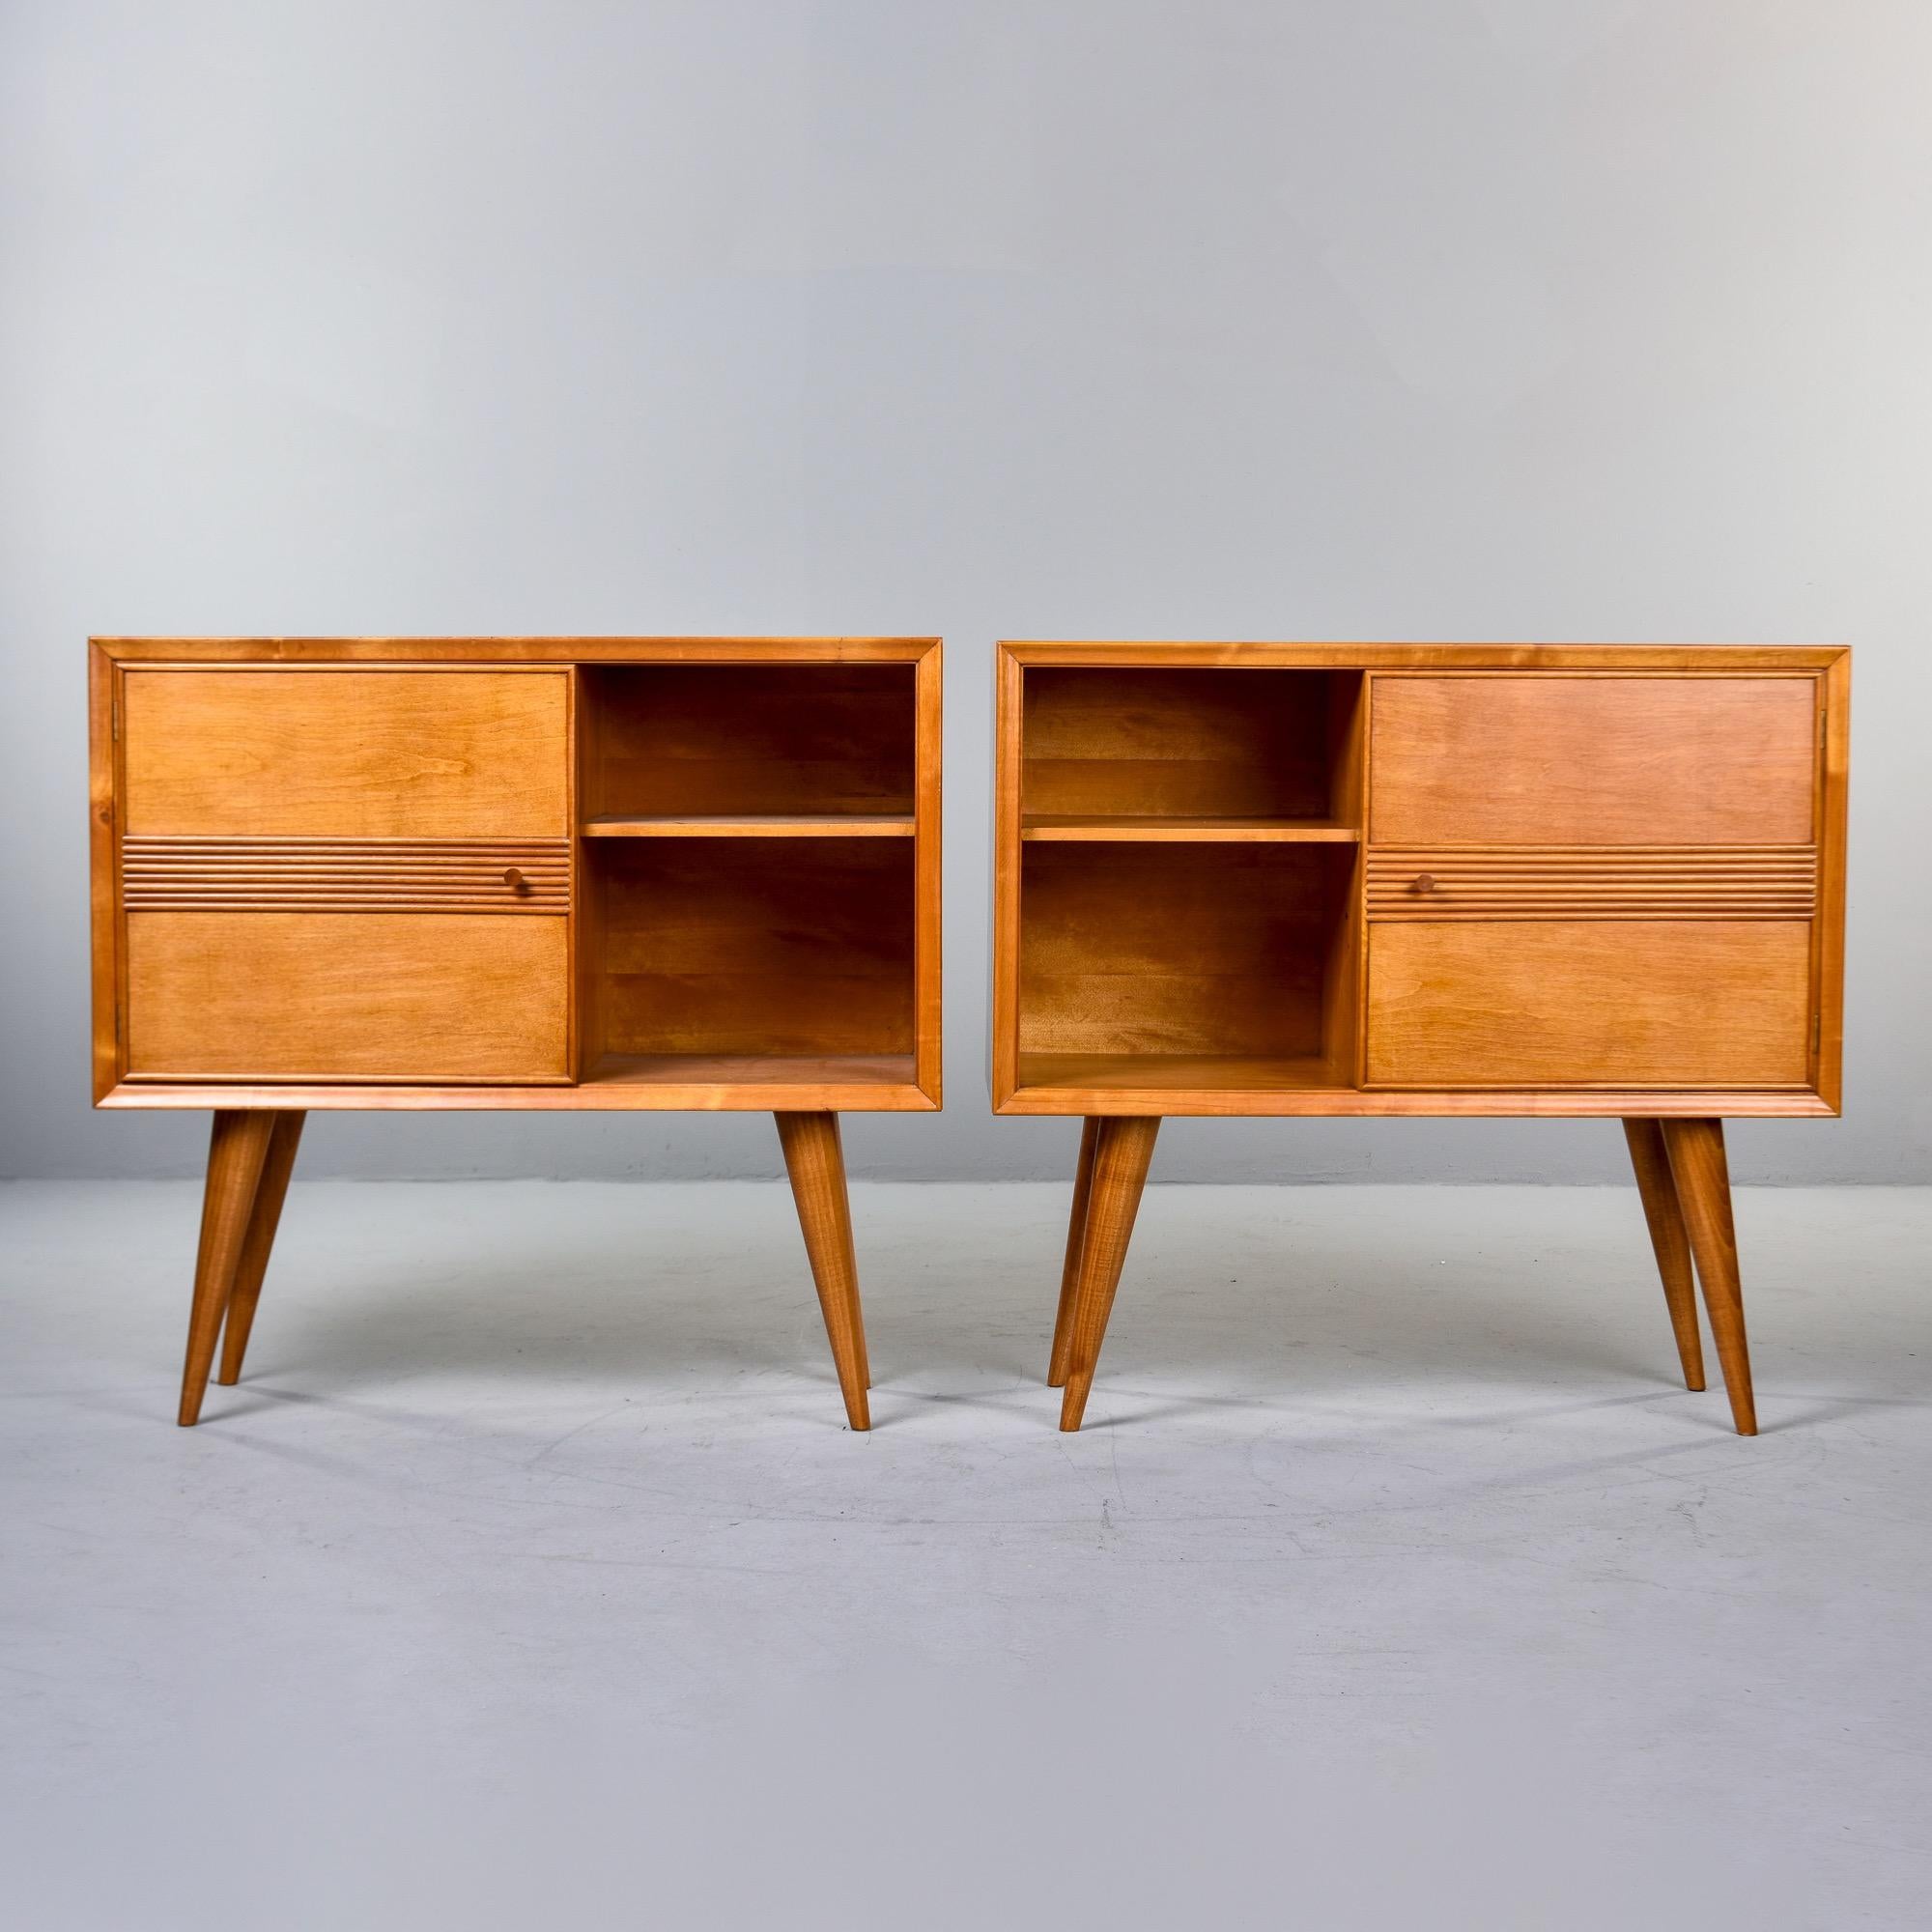 Found in Italy, this pair of ash wood side chests dates from the 1950s. Warm, medium blond in color, the cabinets each have an open compartment with a single fixed shelf and decorative carved banding on a hinged door that opens to interior storage